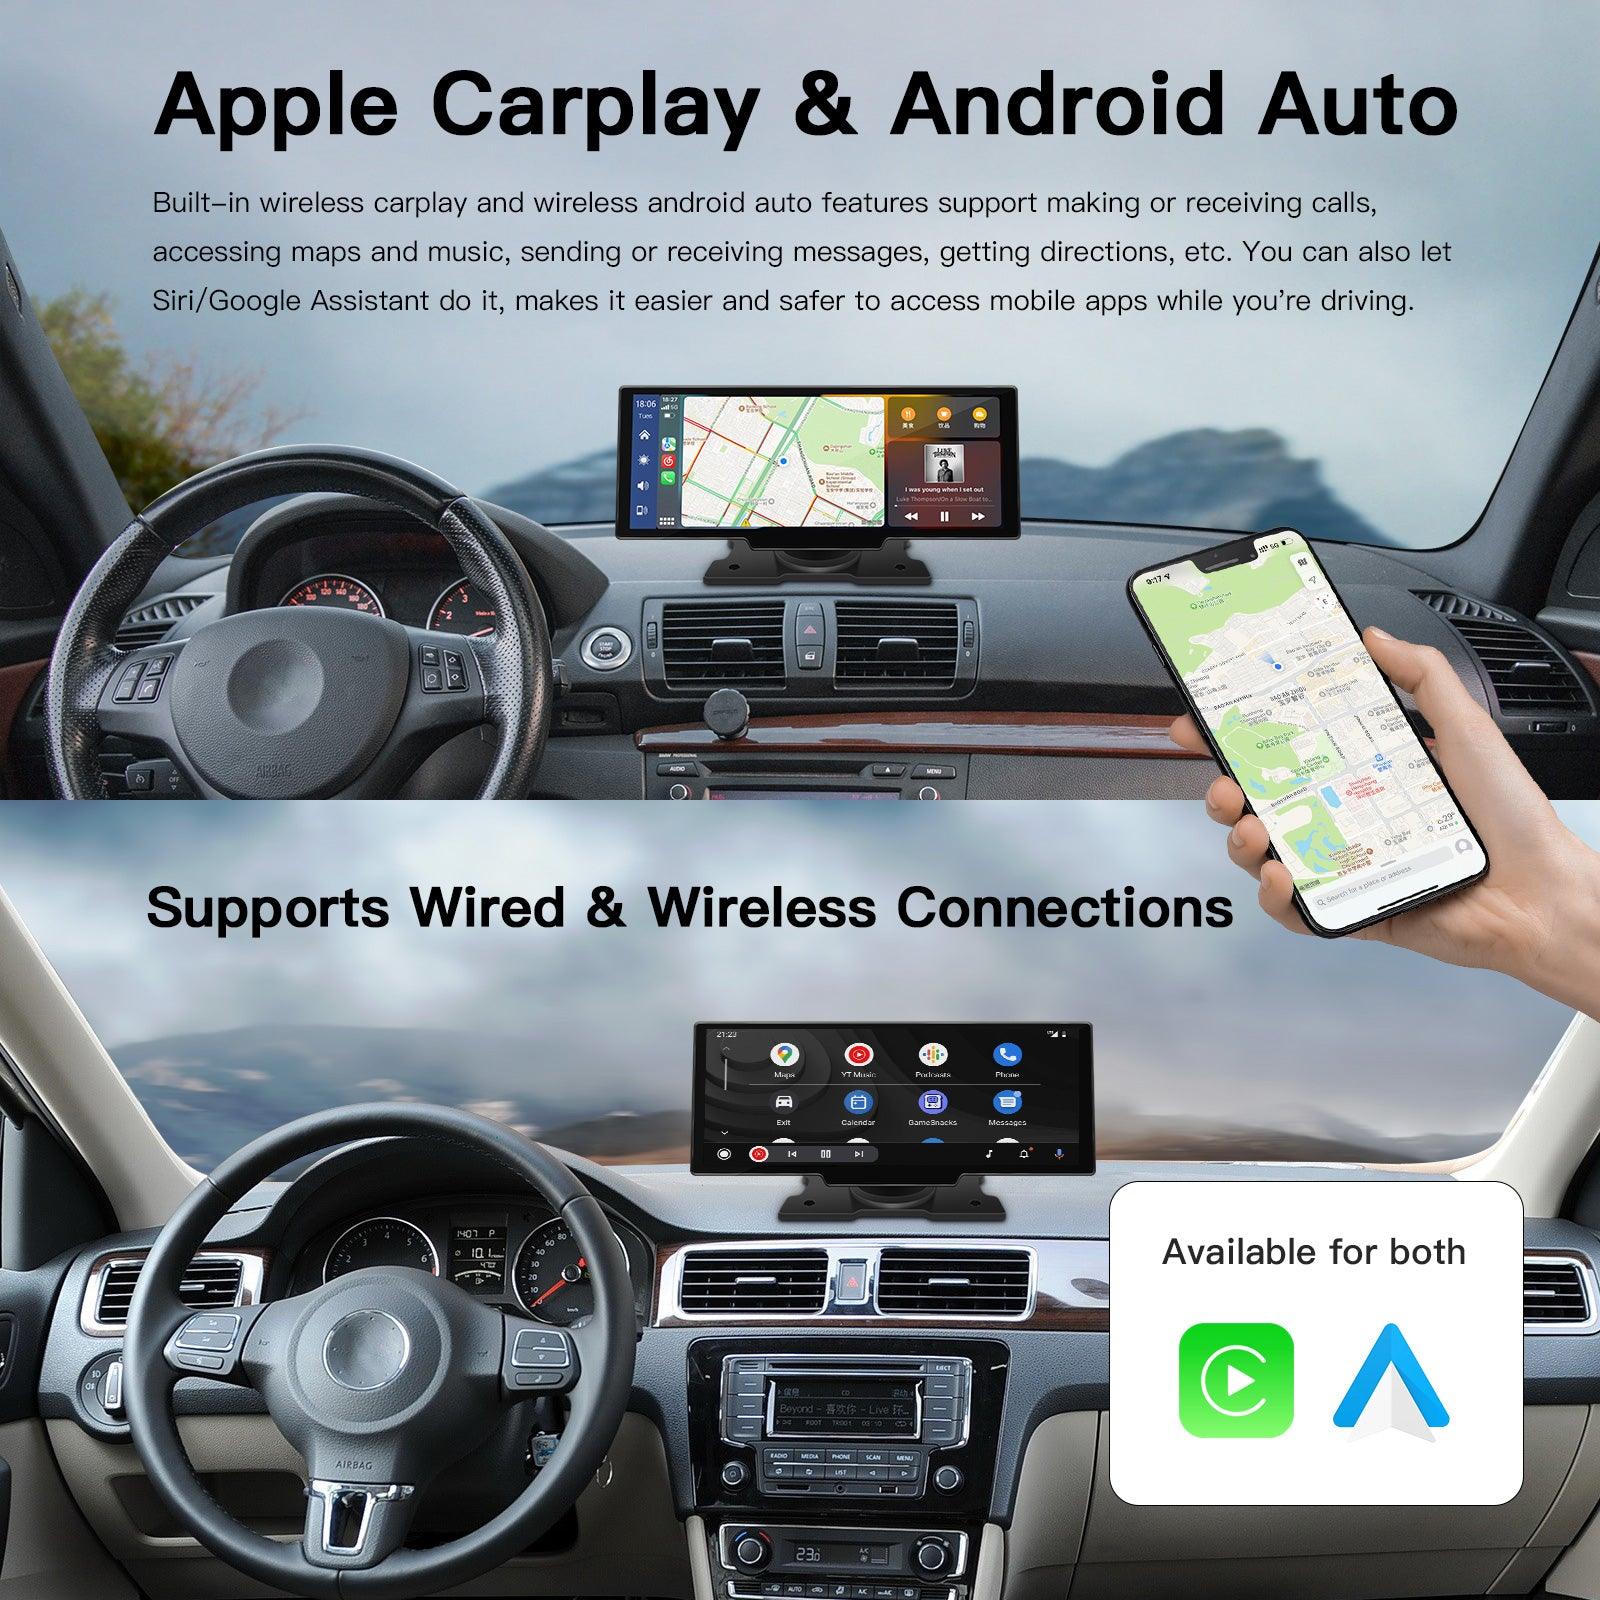 Apple Car Play, Android Auto e ricarica Wireless